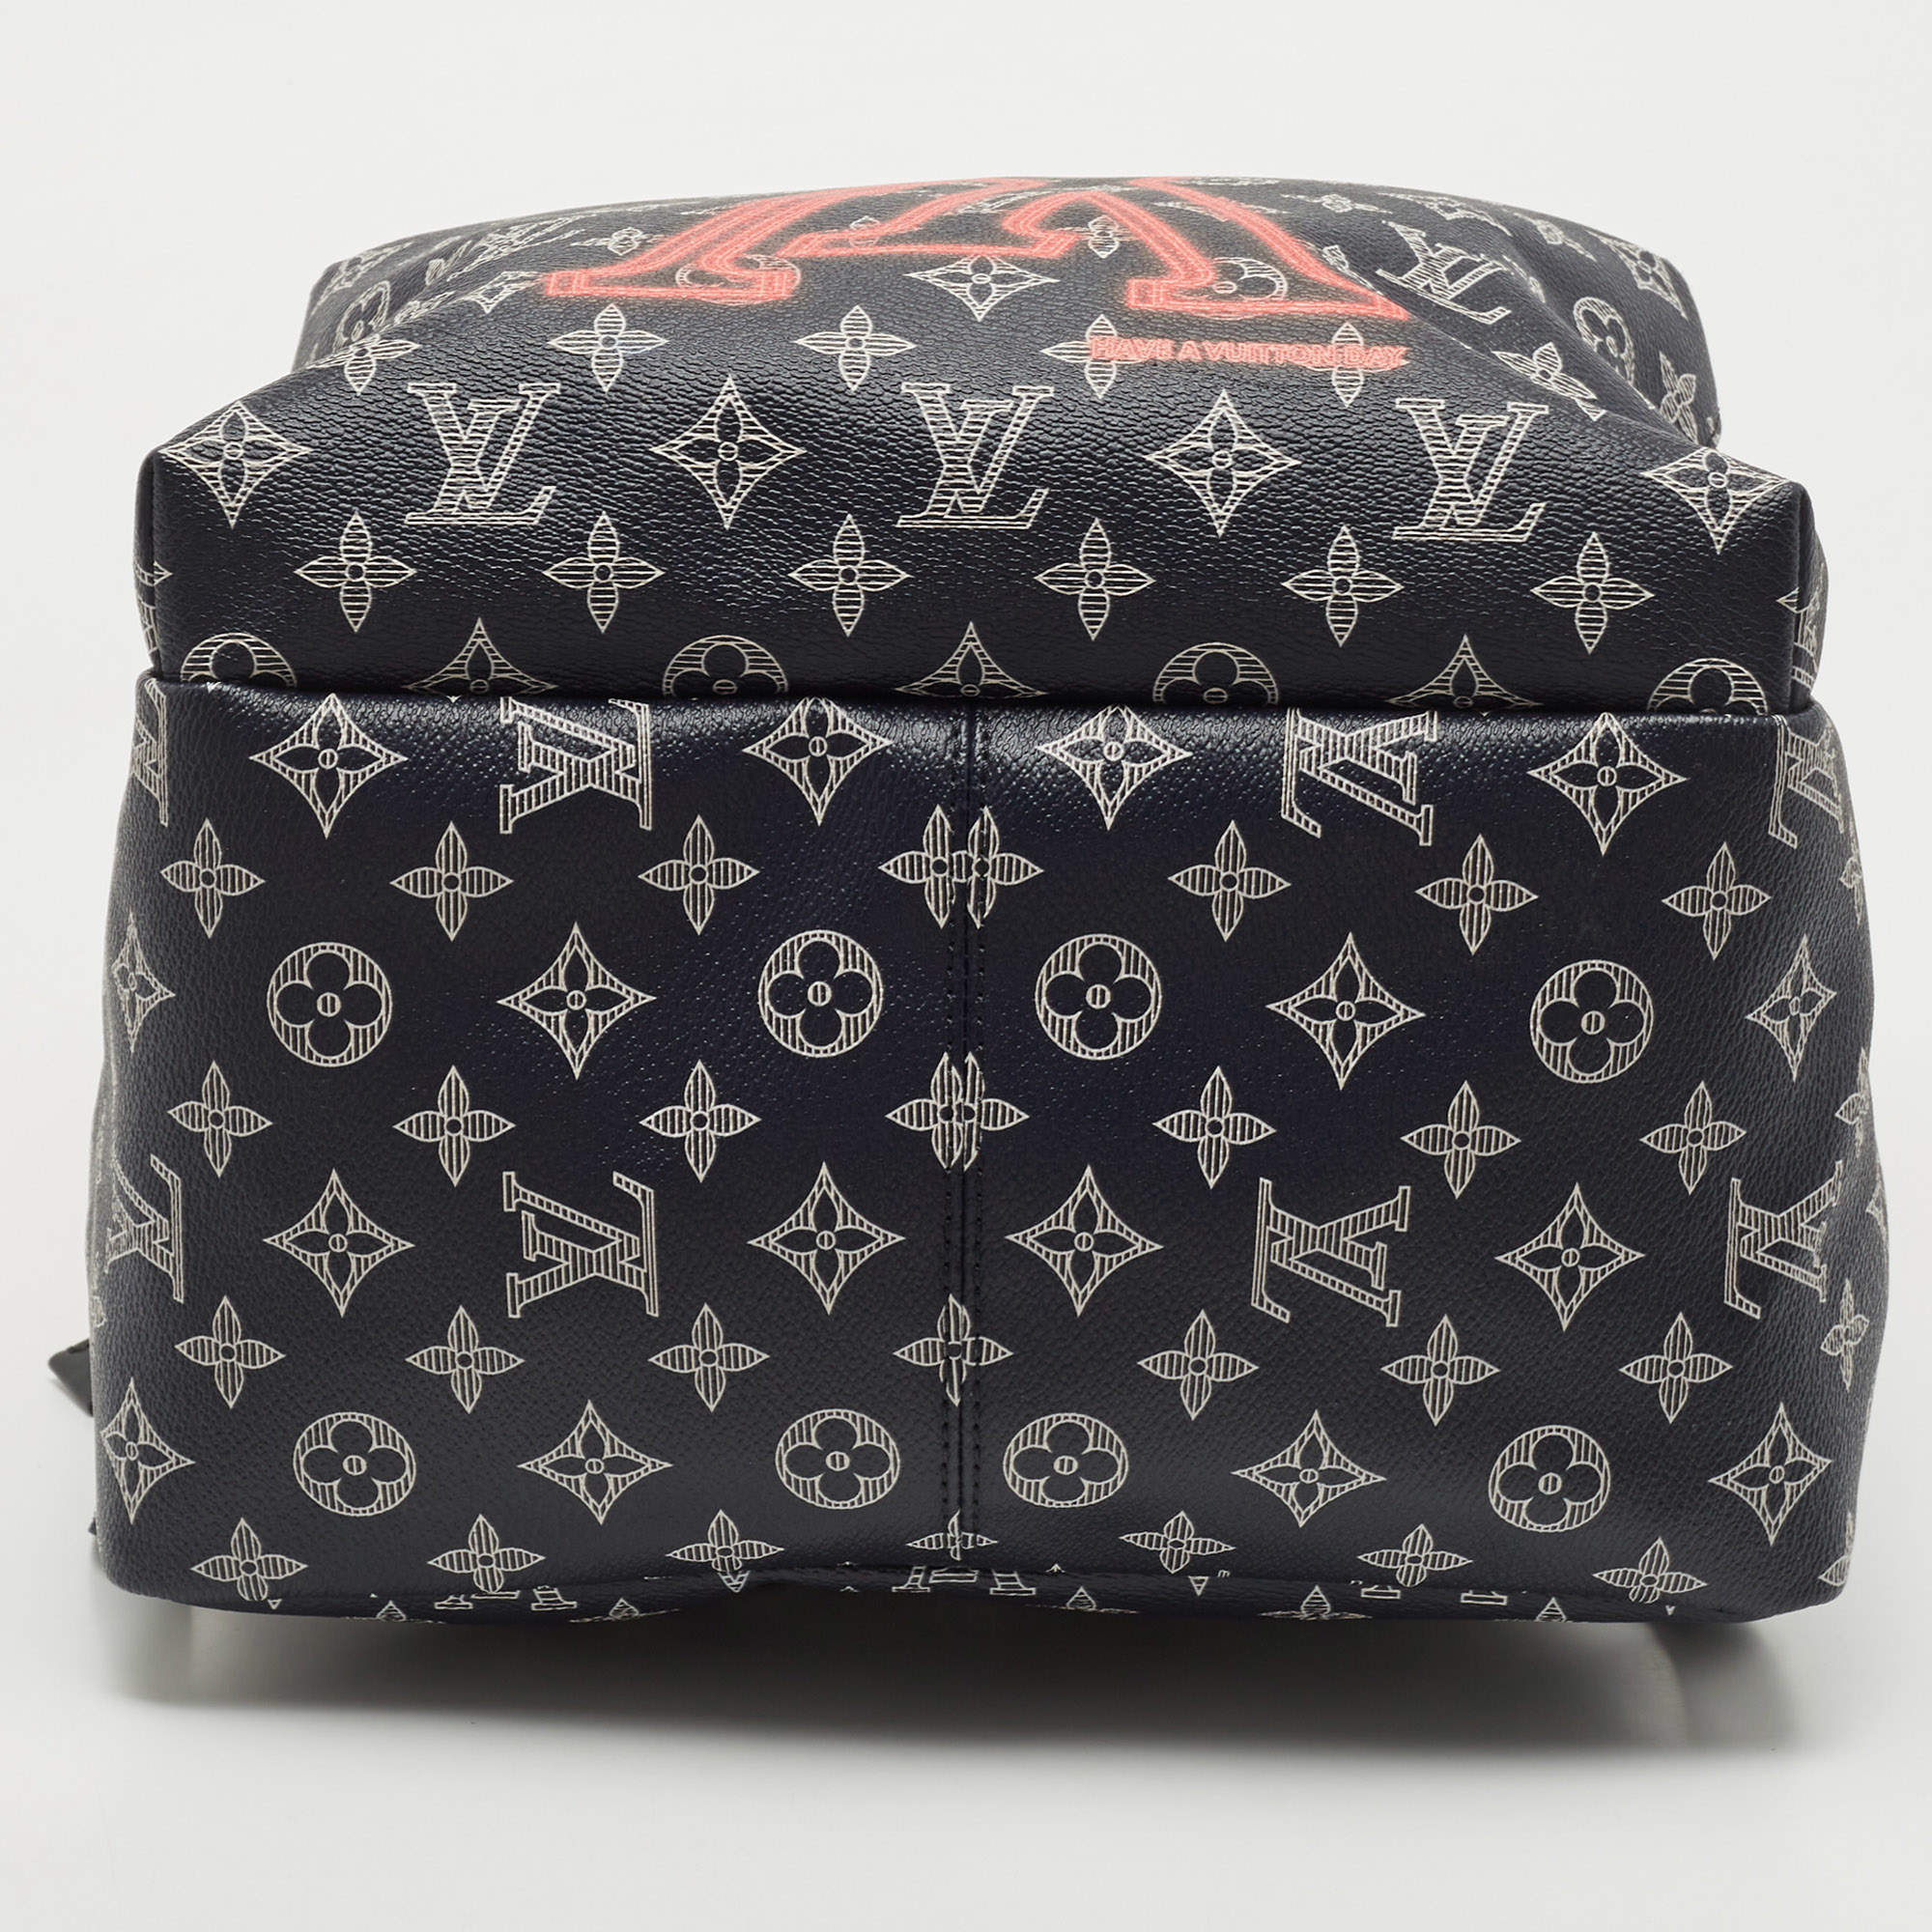 Louis Vuitton, Bags, Louis Vuitton Discovery Monogram Backpack Ink Upside  Down